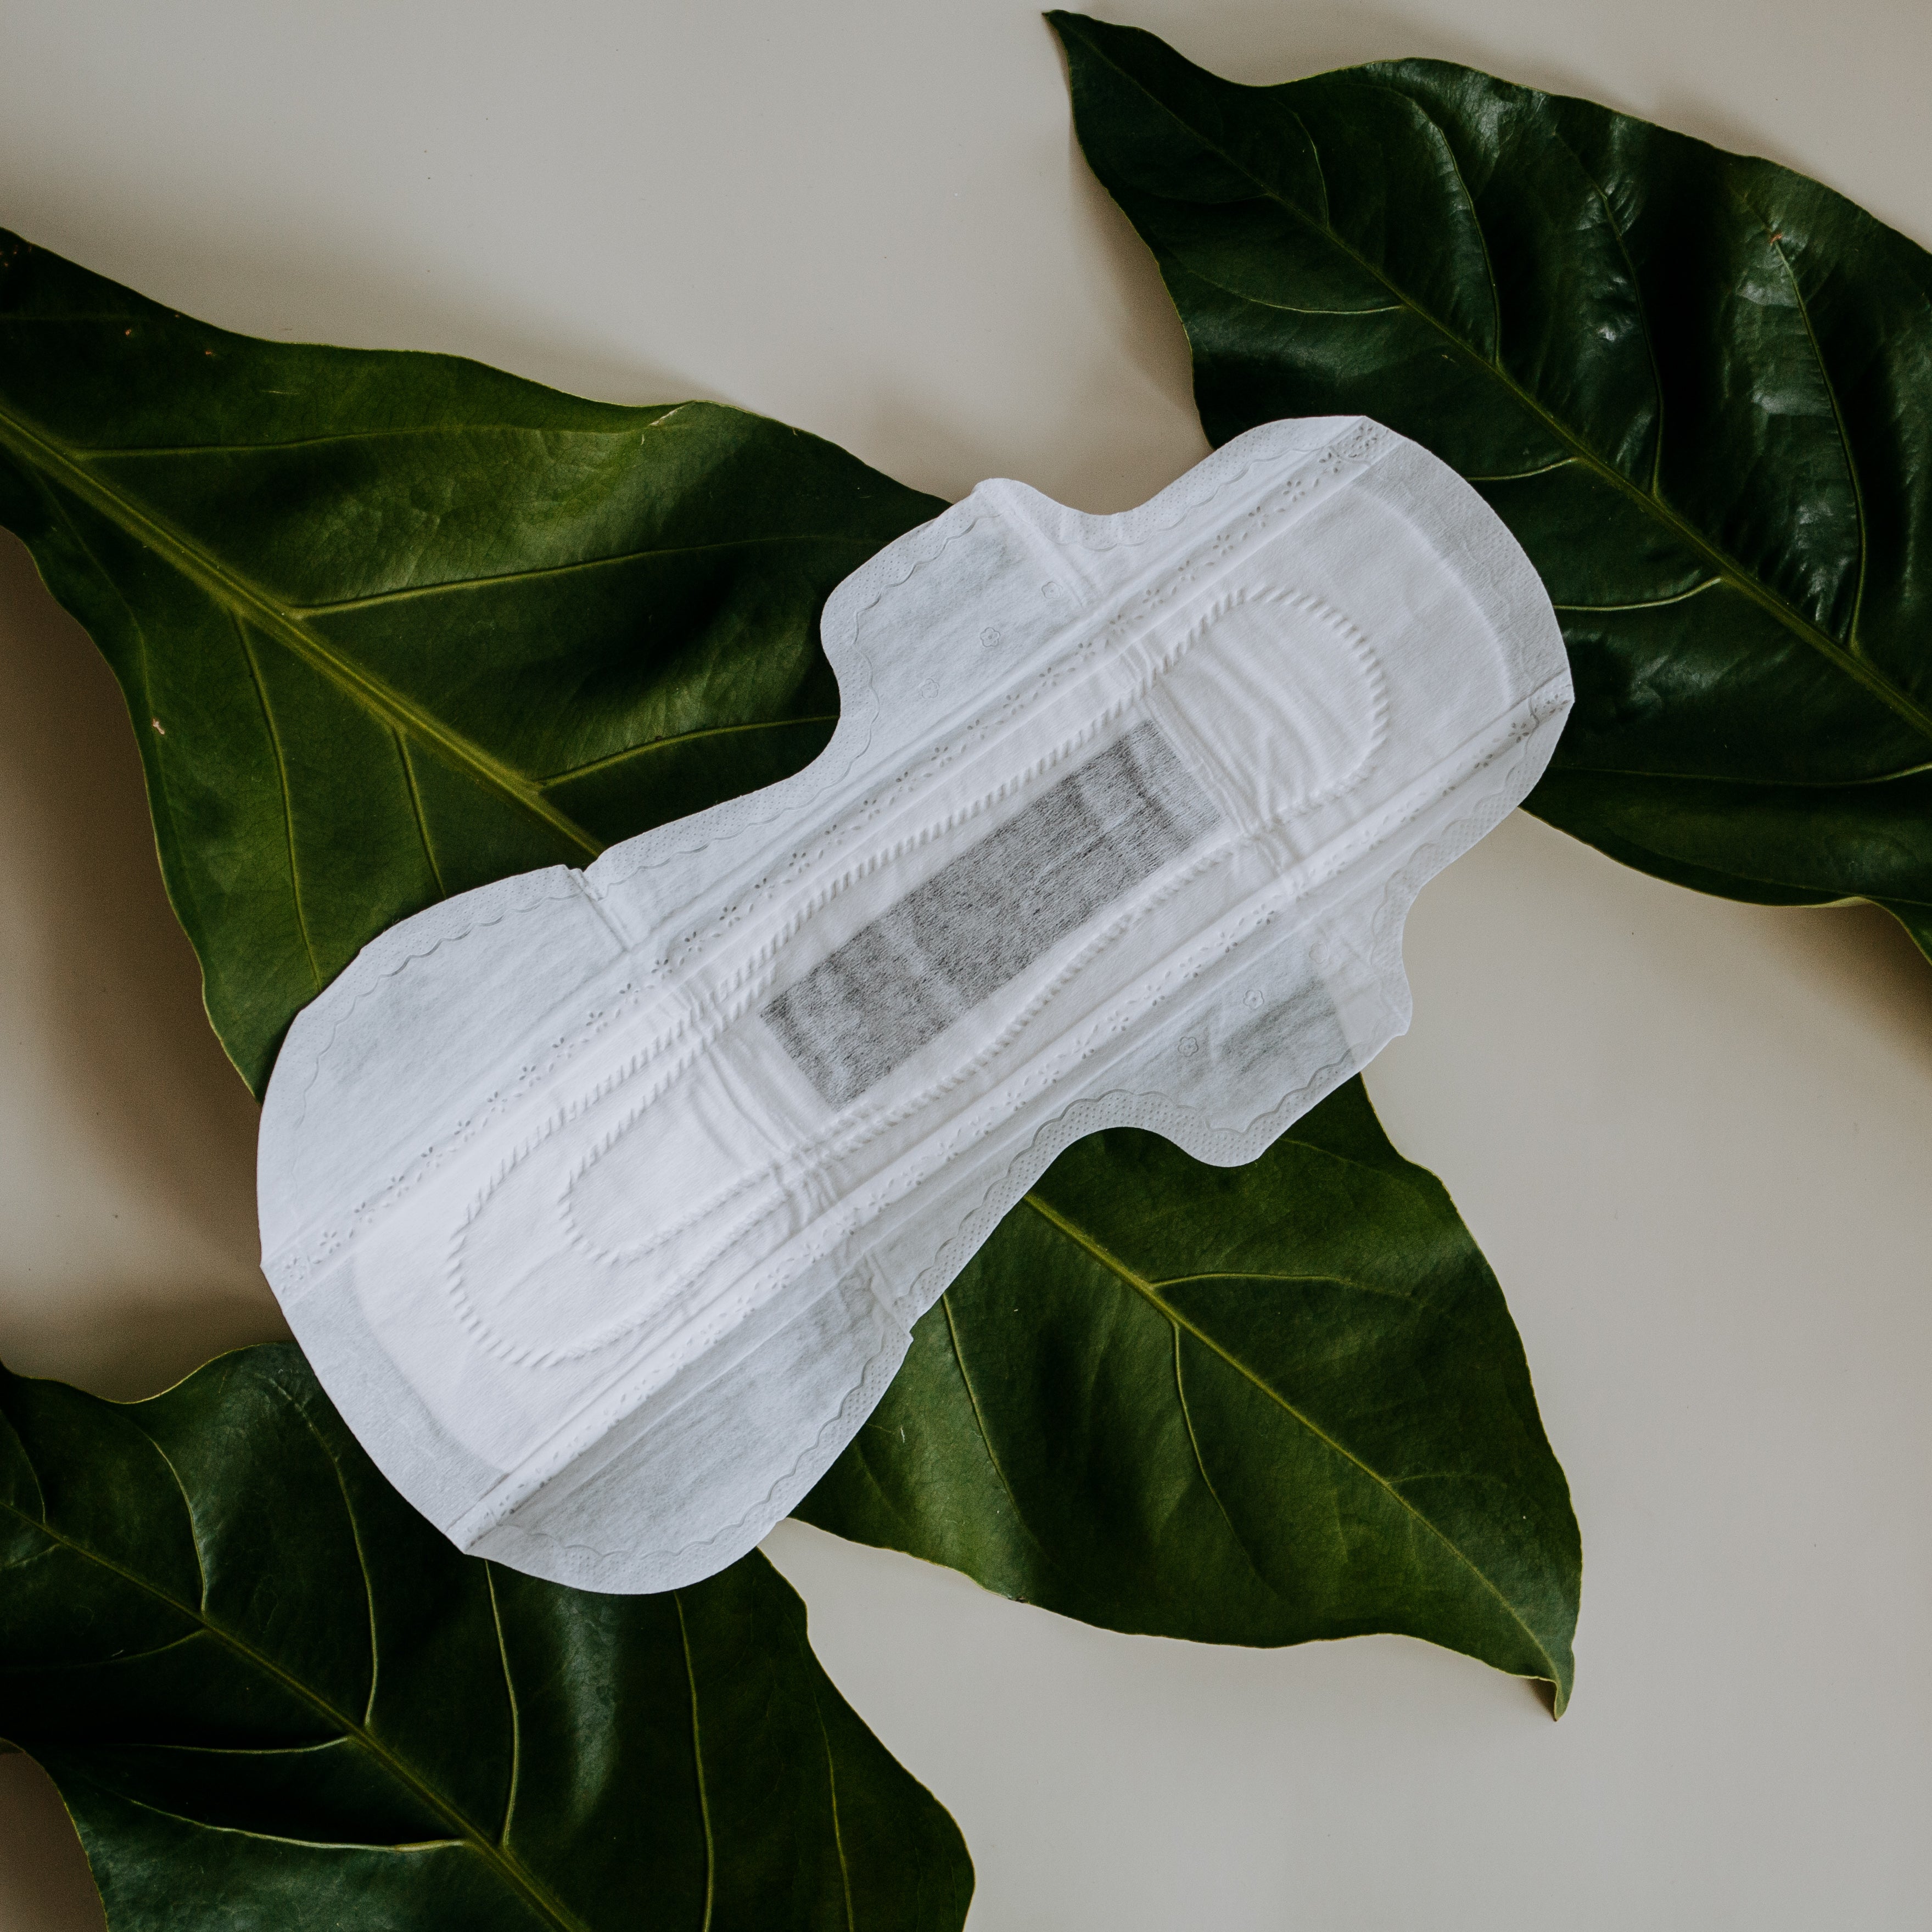 Eco-Friendly Period Care  Organic Cotton Pads, Liners & Tampons – BOBBLE